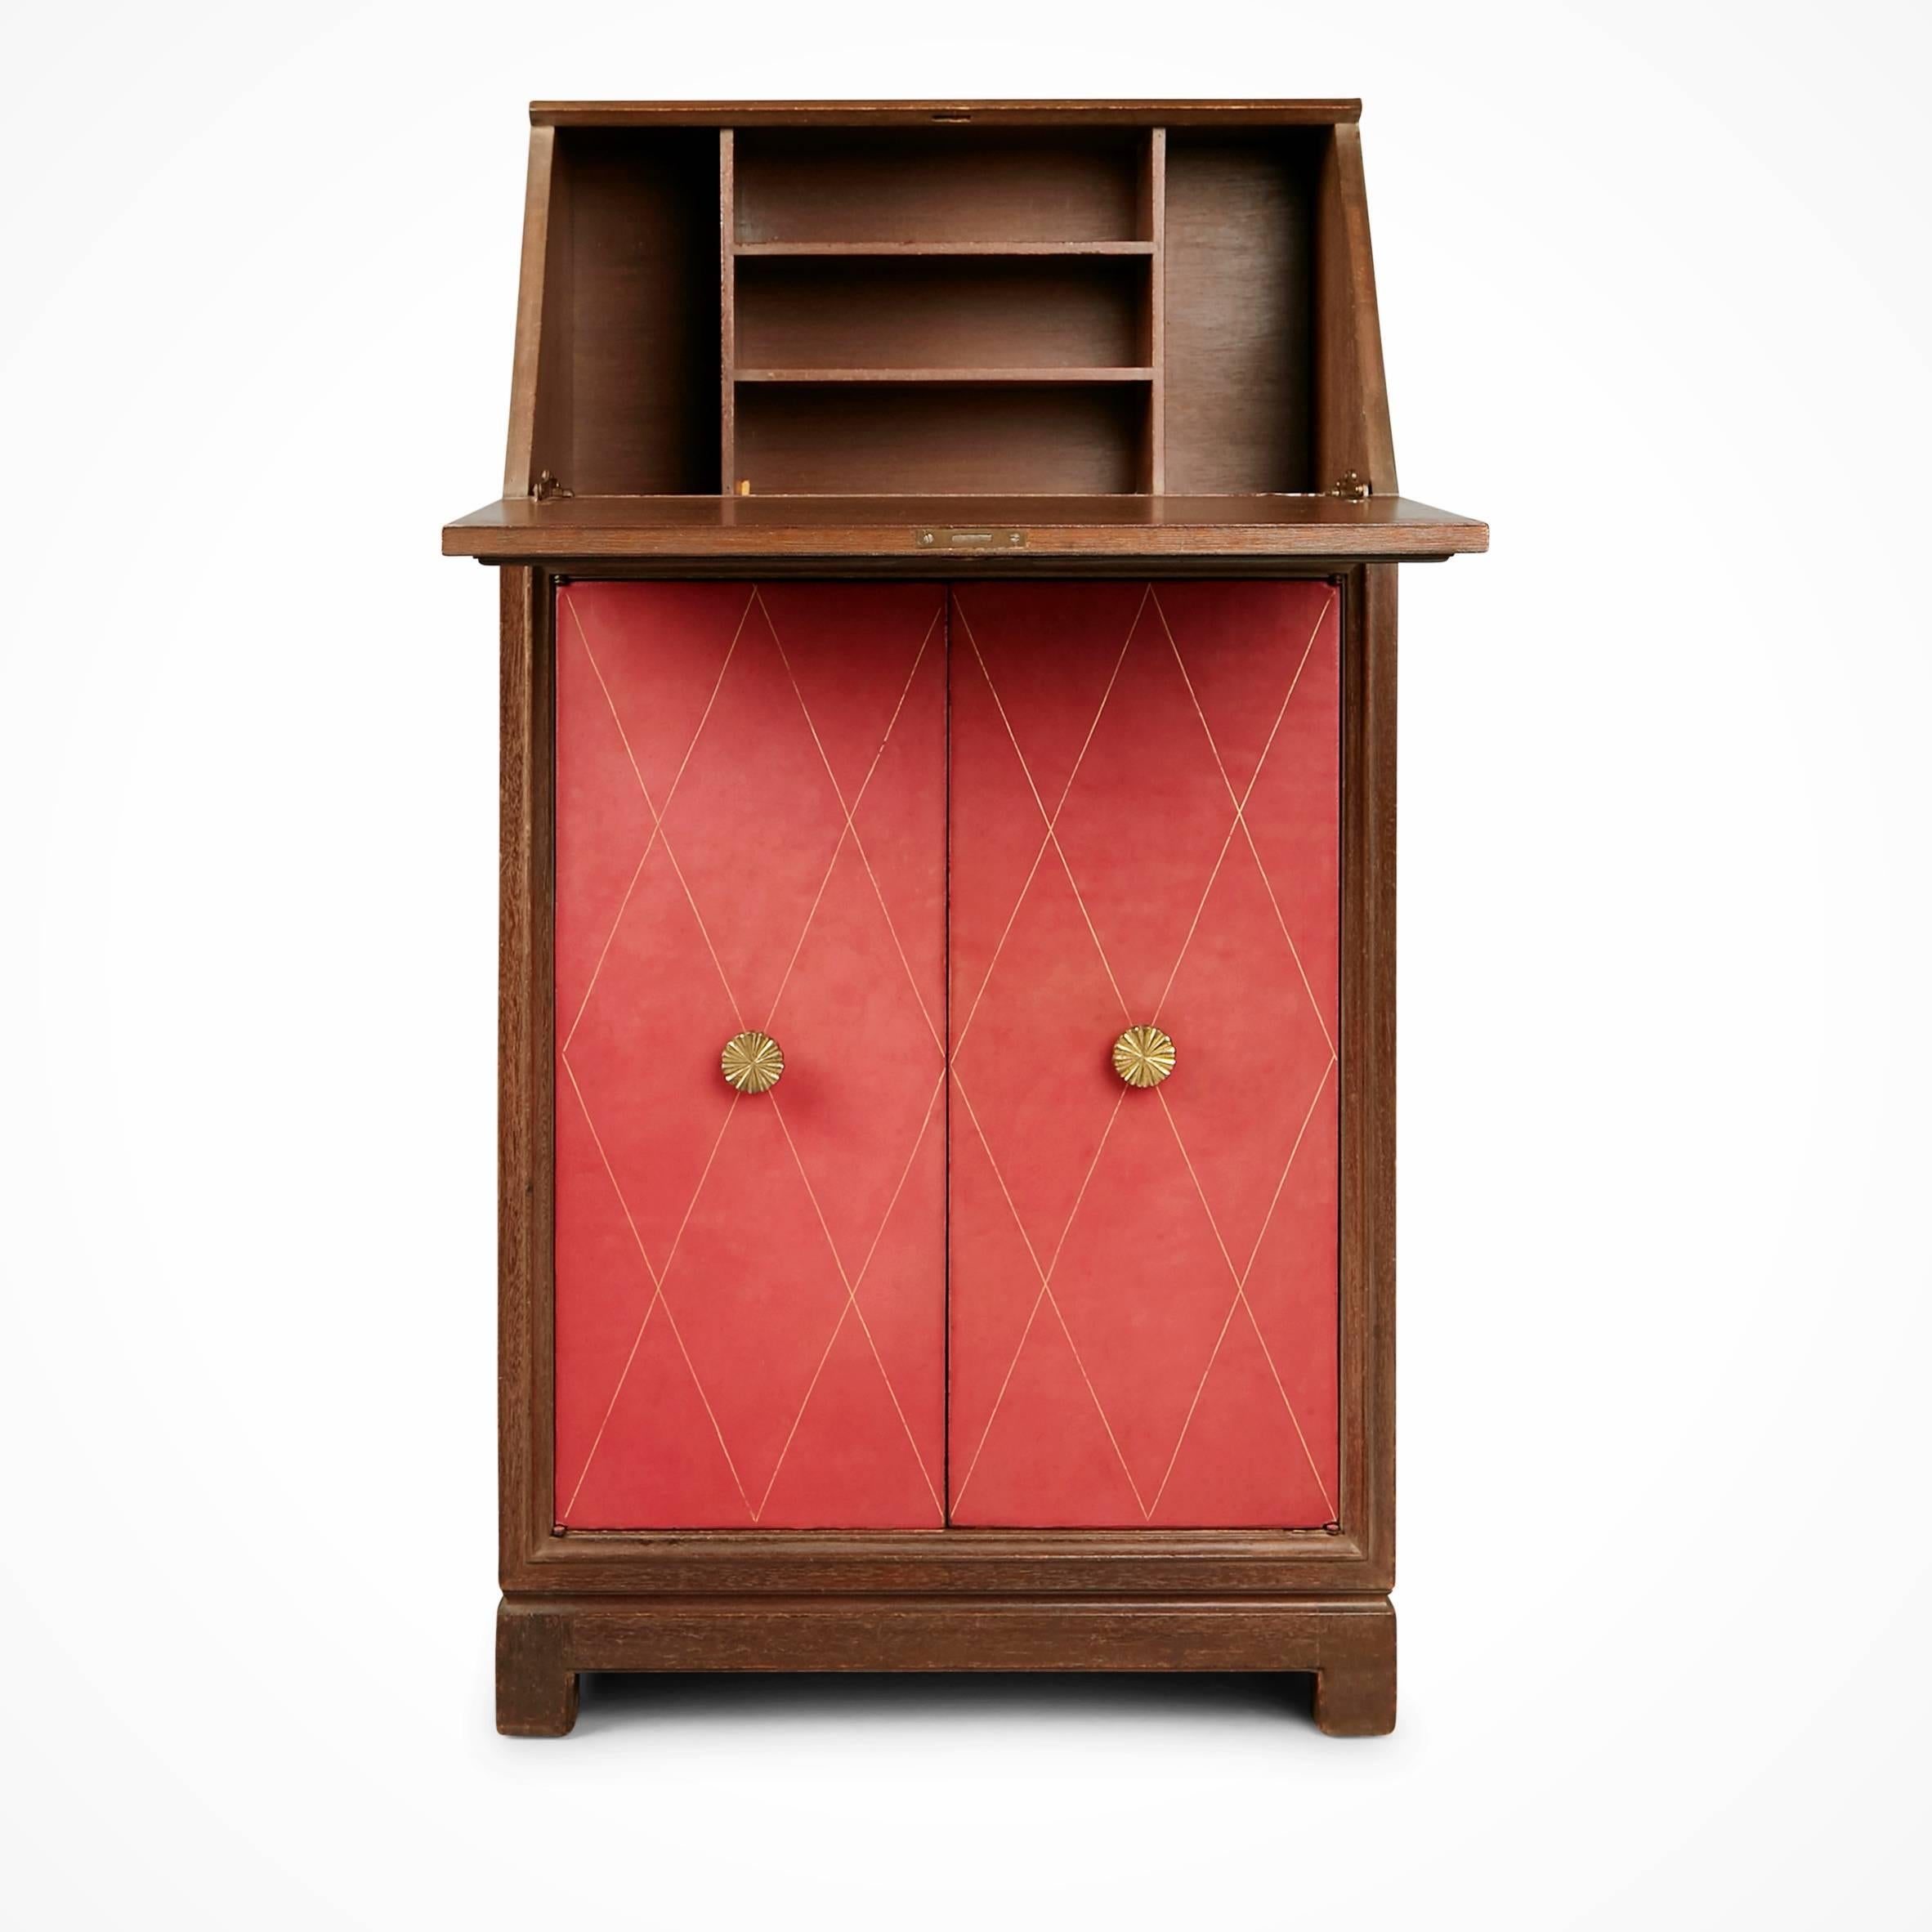 Exquisitely designed secretary bureau by Tommi Parzinger for Charak Modern. This elegantly executed piece is fabricated from pickled mahogany with tooled leather in a color that falls somewhere between pink and rose cupboard doors punctuated by